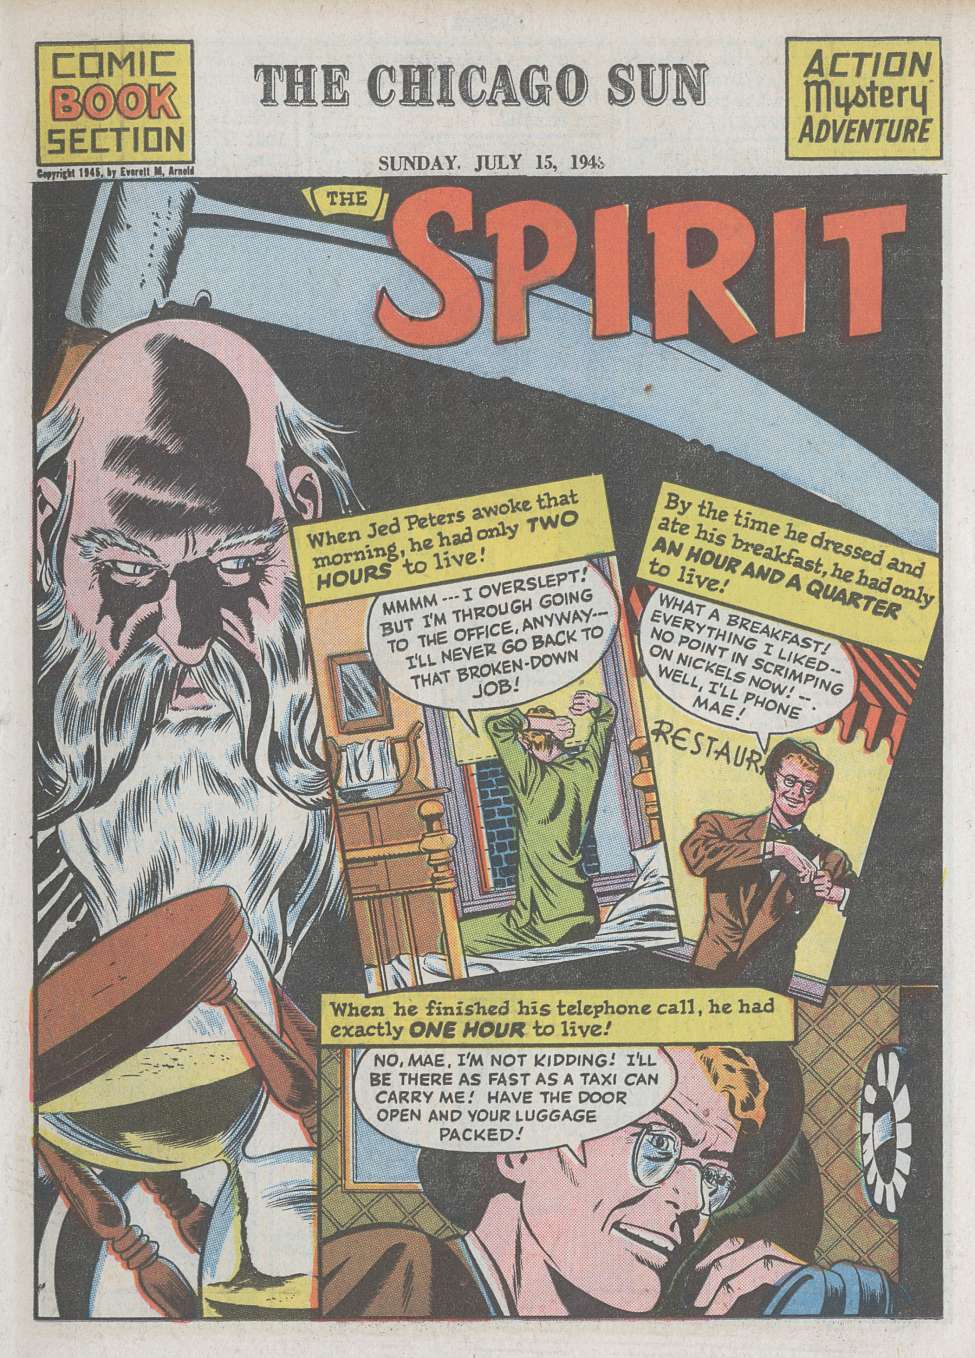 Book Cover For The Spirit (1945-07-15) - Chicago Sun - Version 1